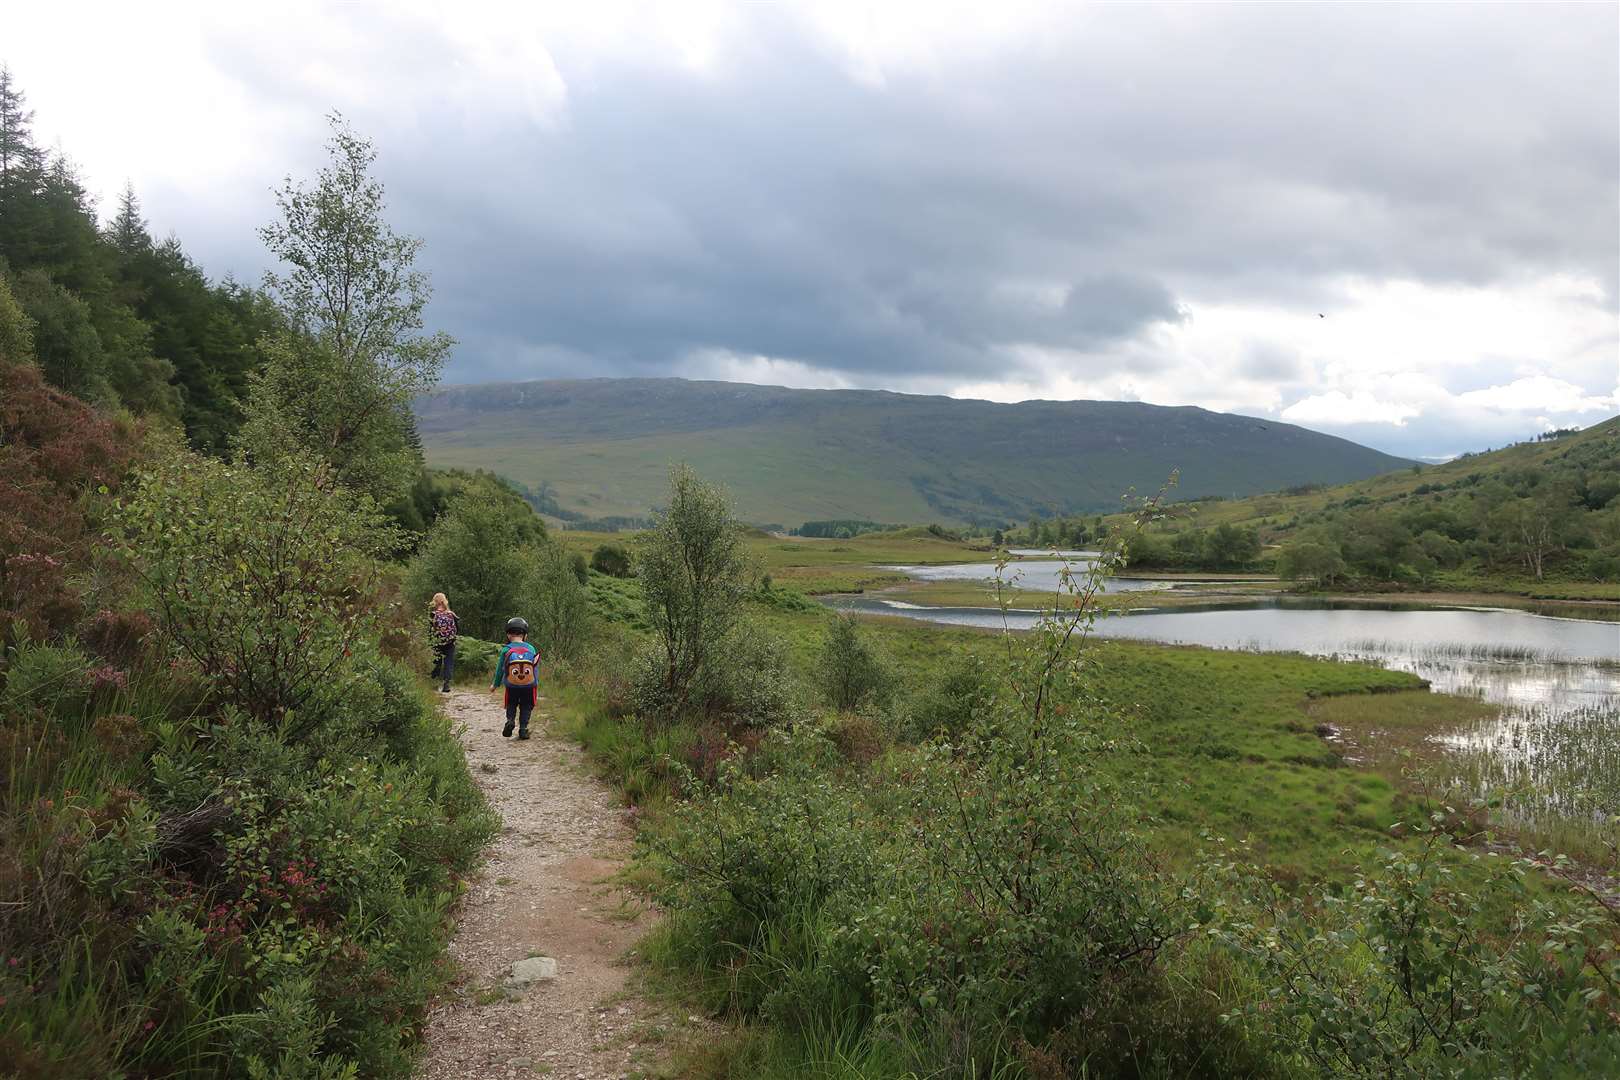 On the path towards Loch Coulin.